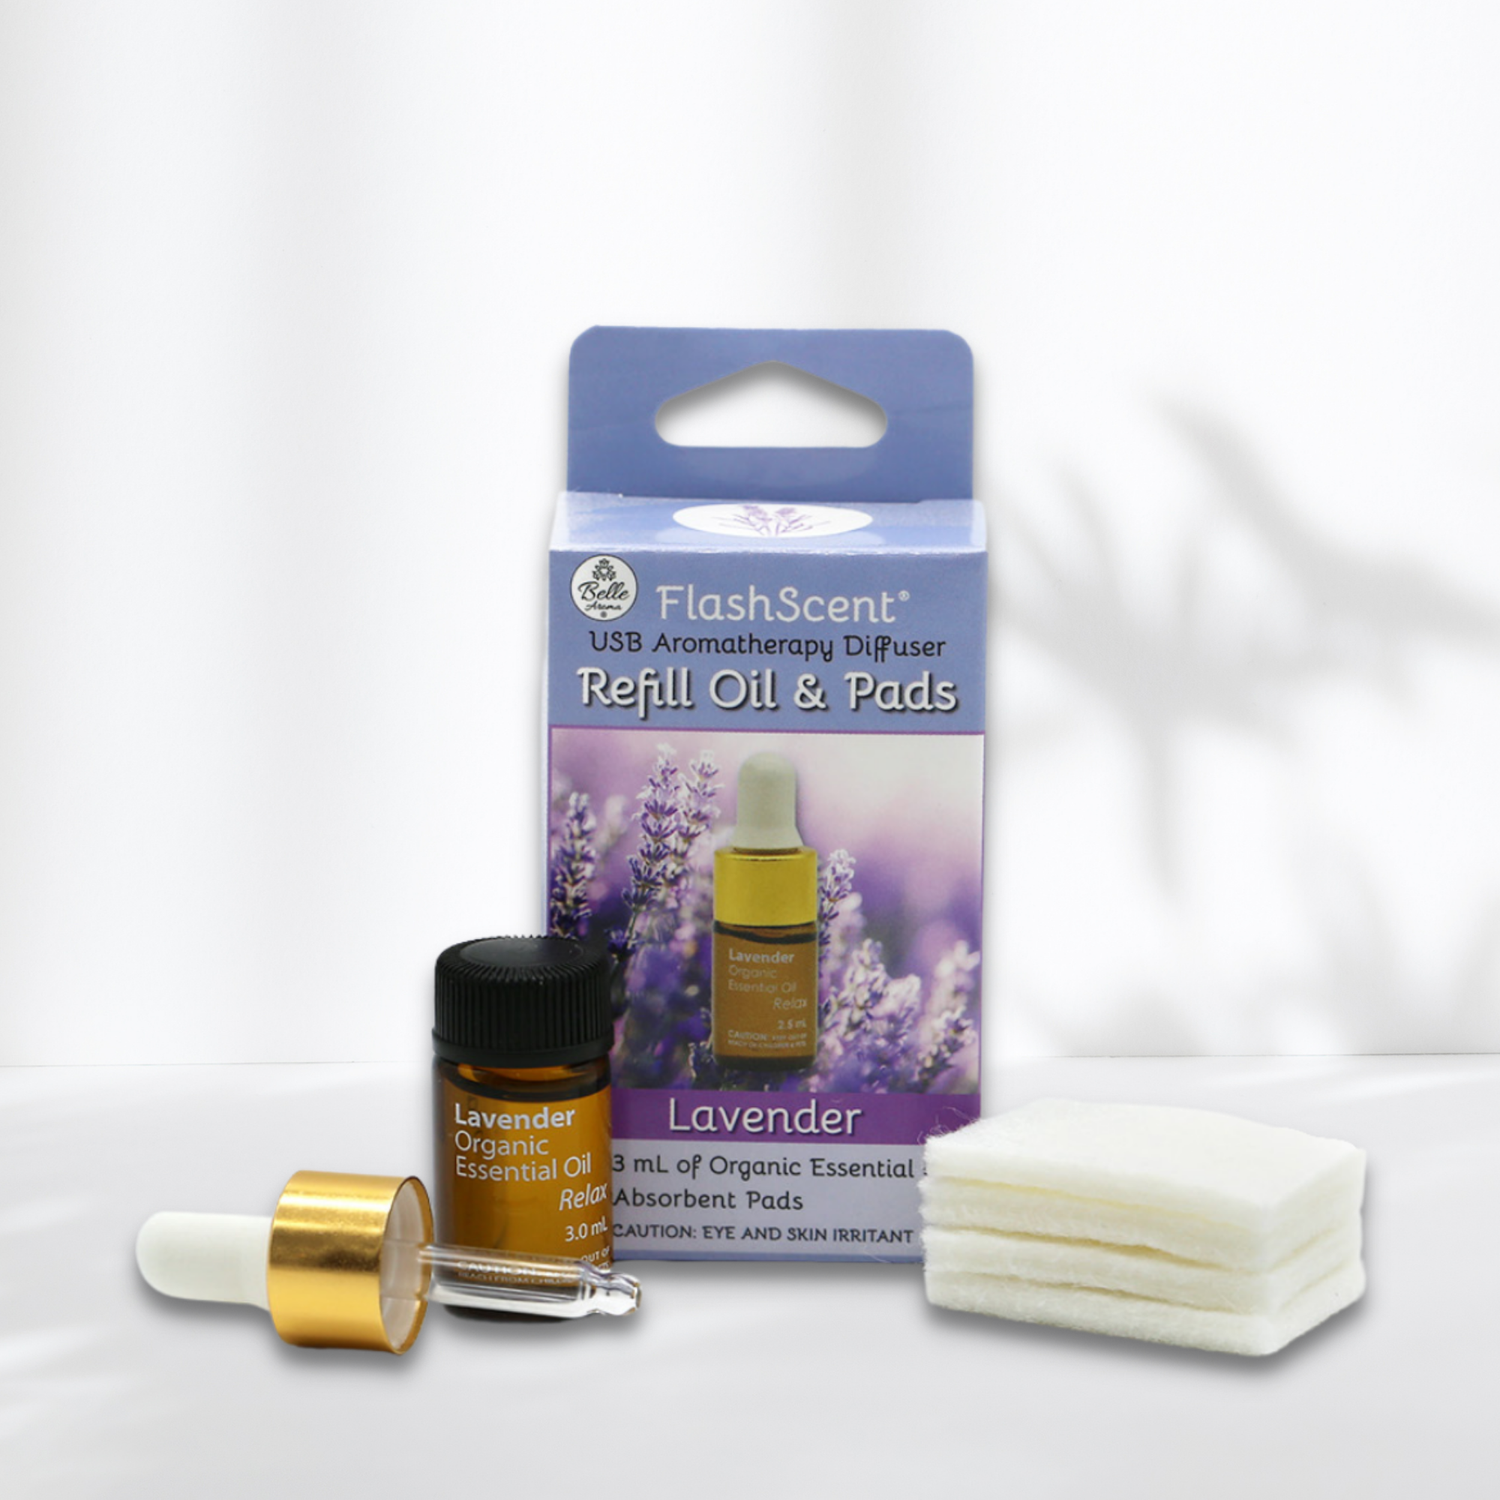 Refill Oil & Pads for the FlashScent USB Aromatherapy Diffuser